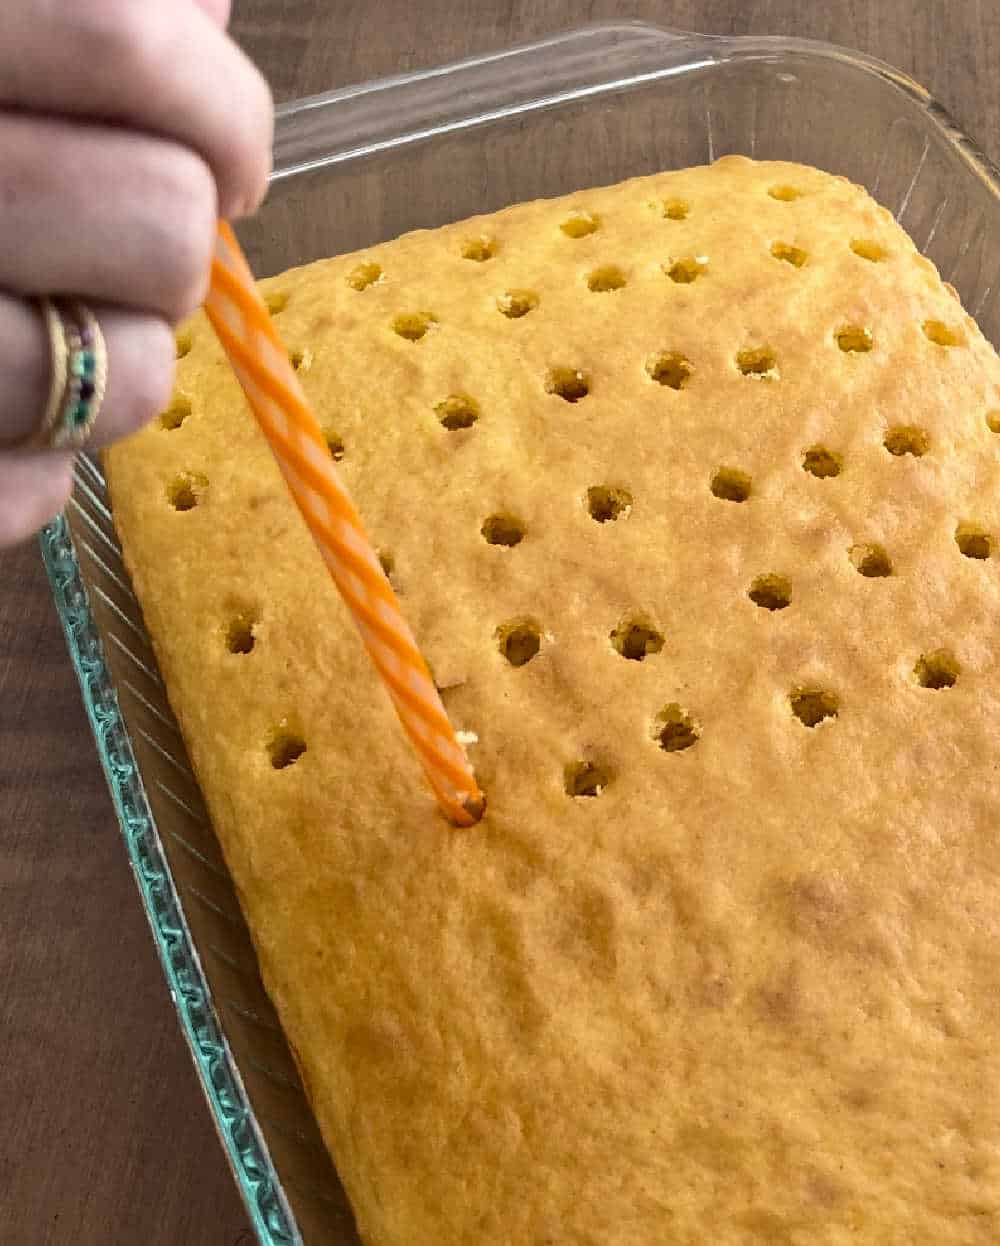 poke holes in cake with large drinking straw.